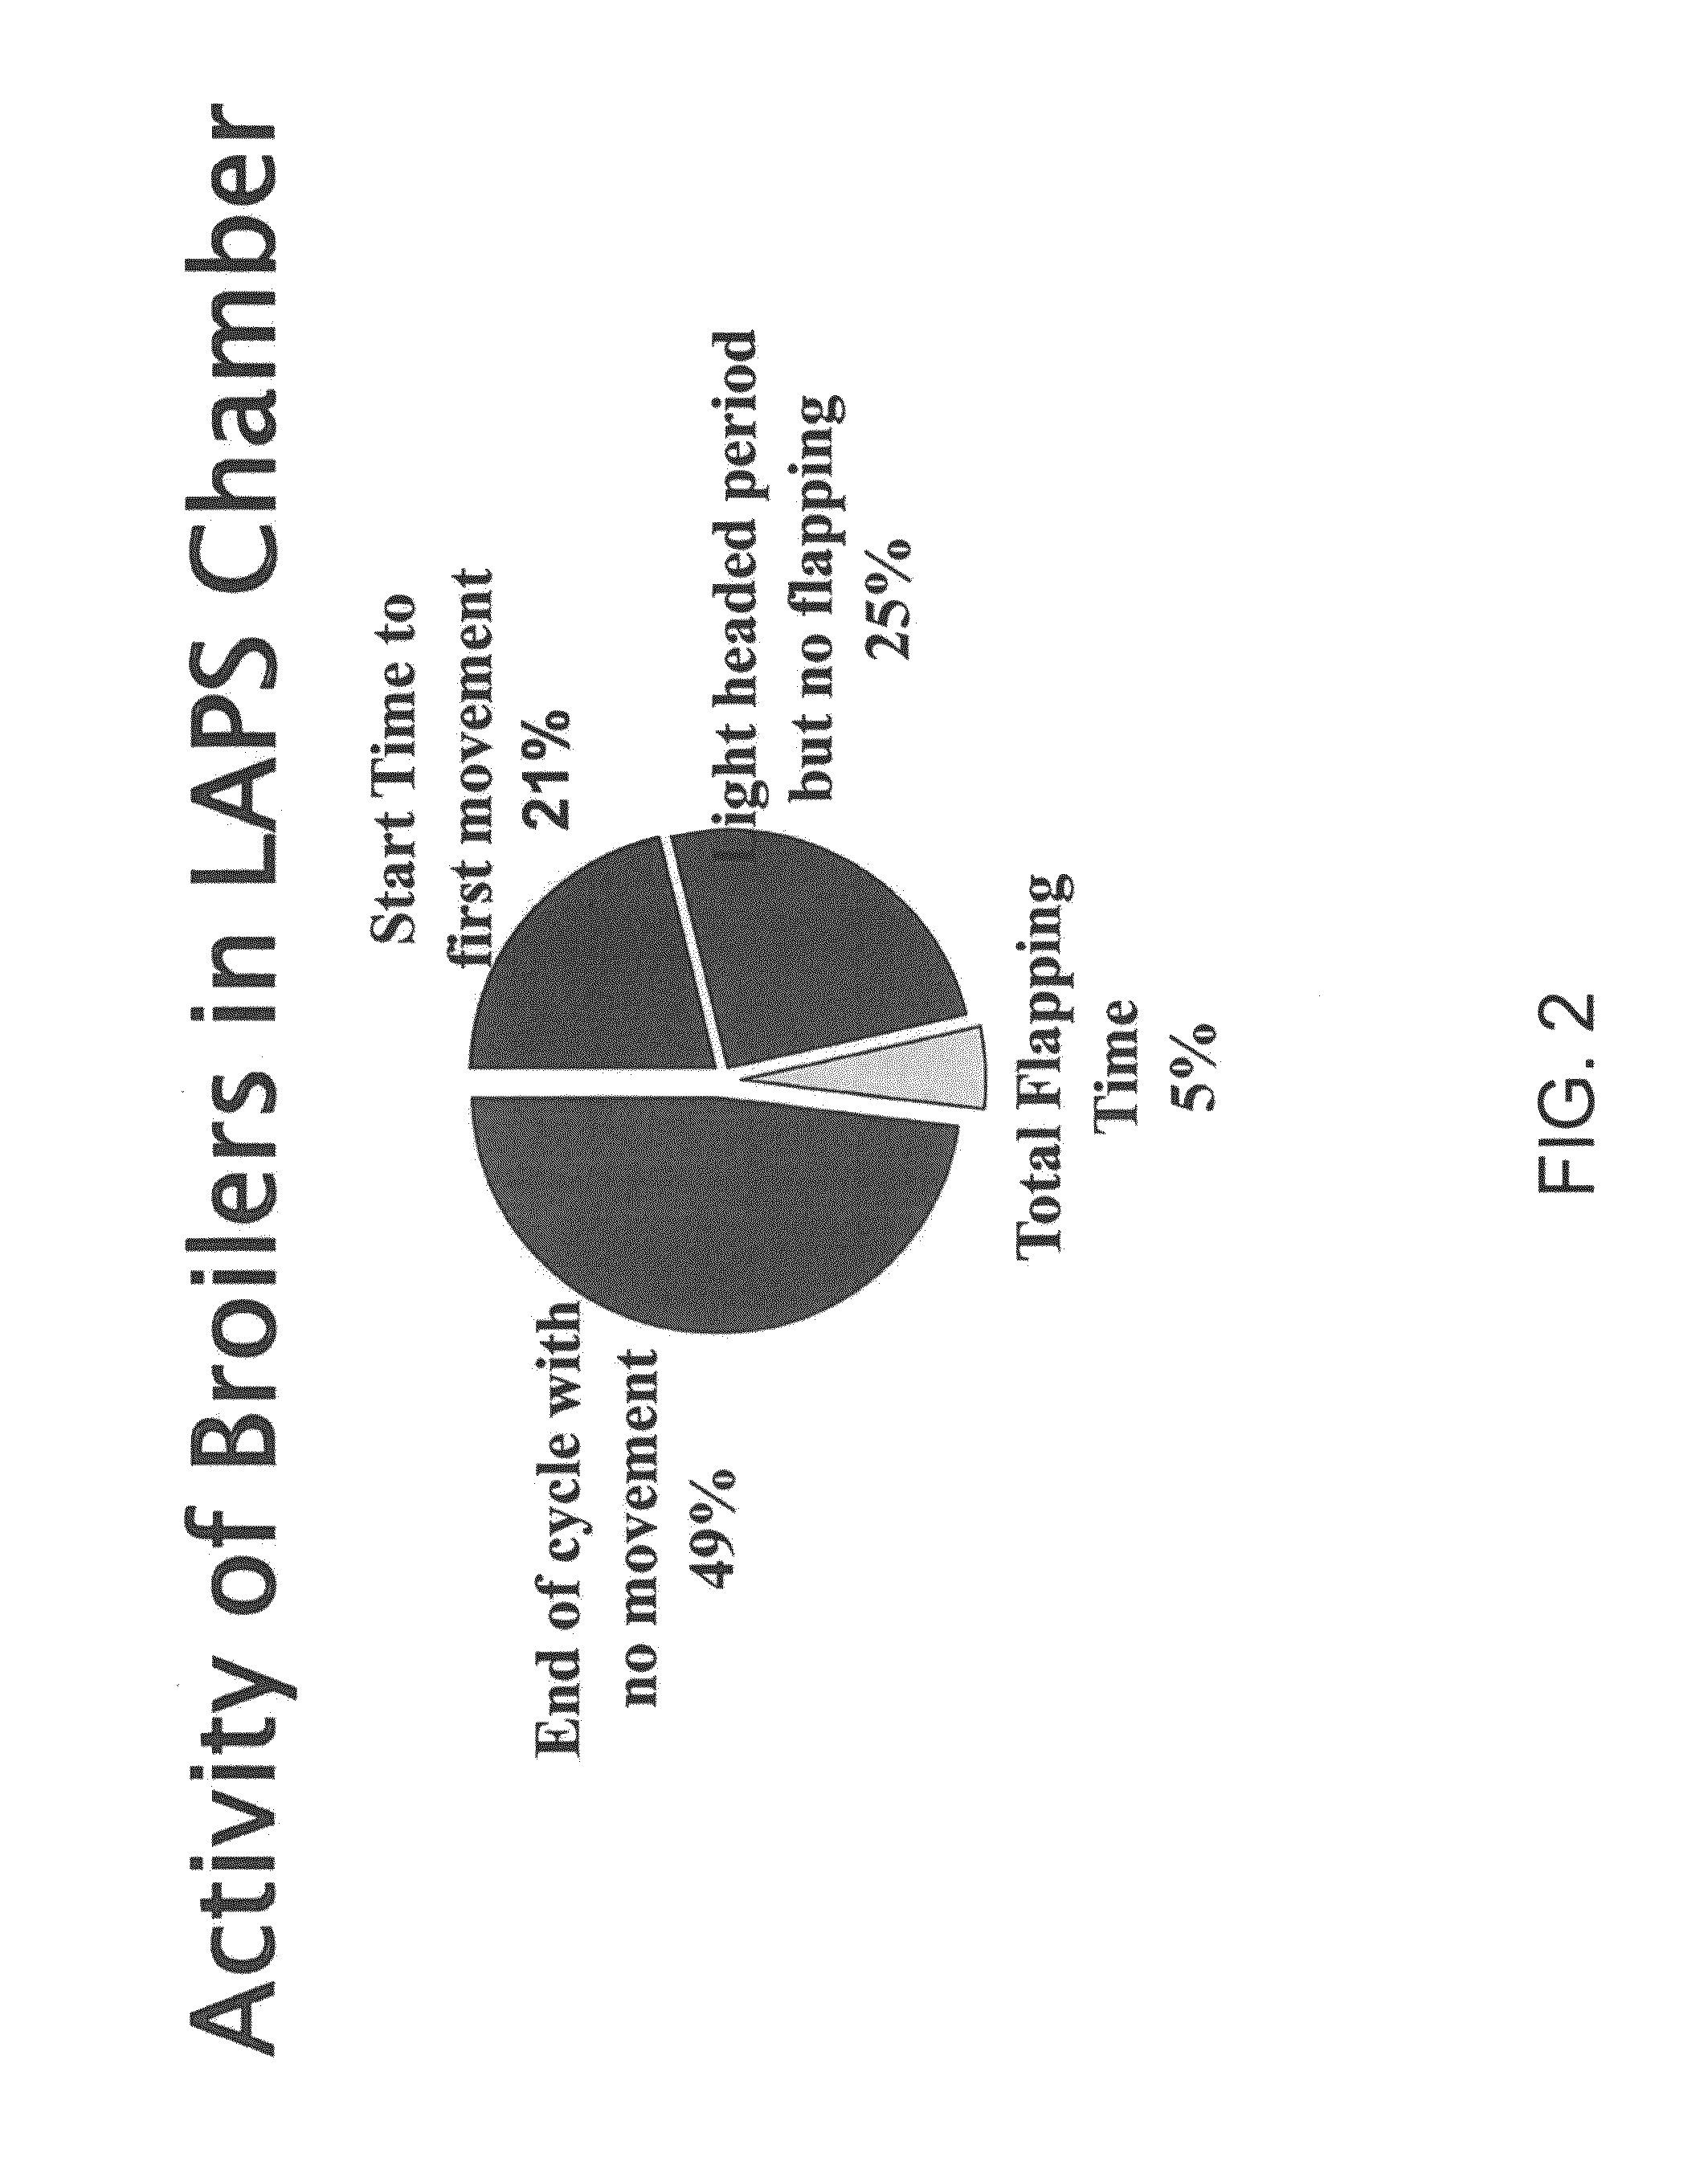 Method for decreasing spastic wing activity of poultry during slaughter